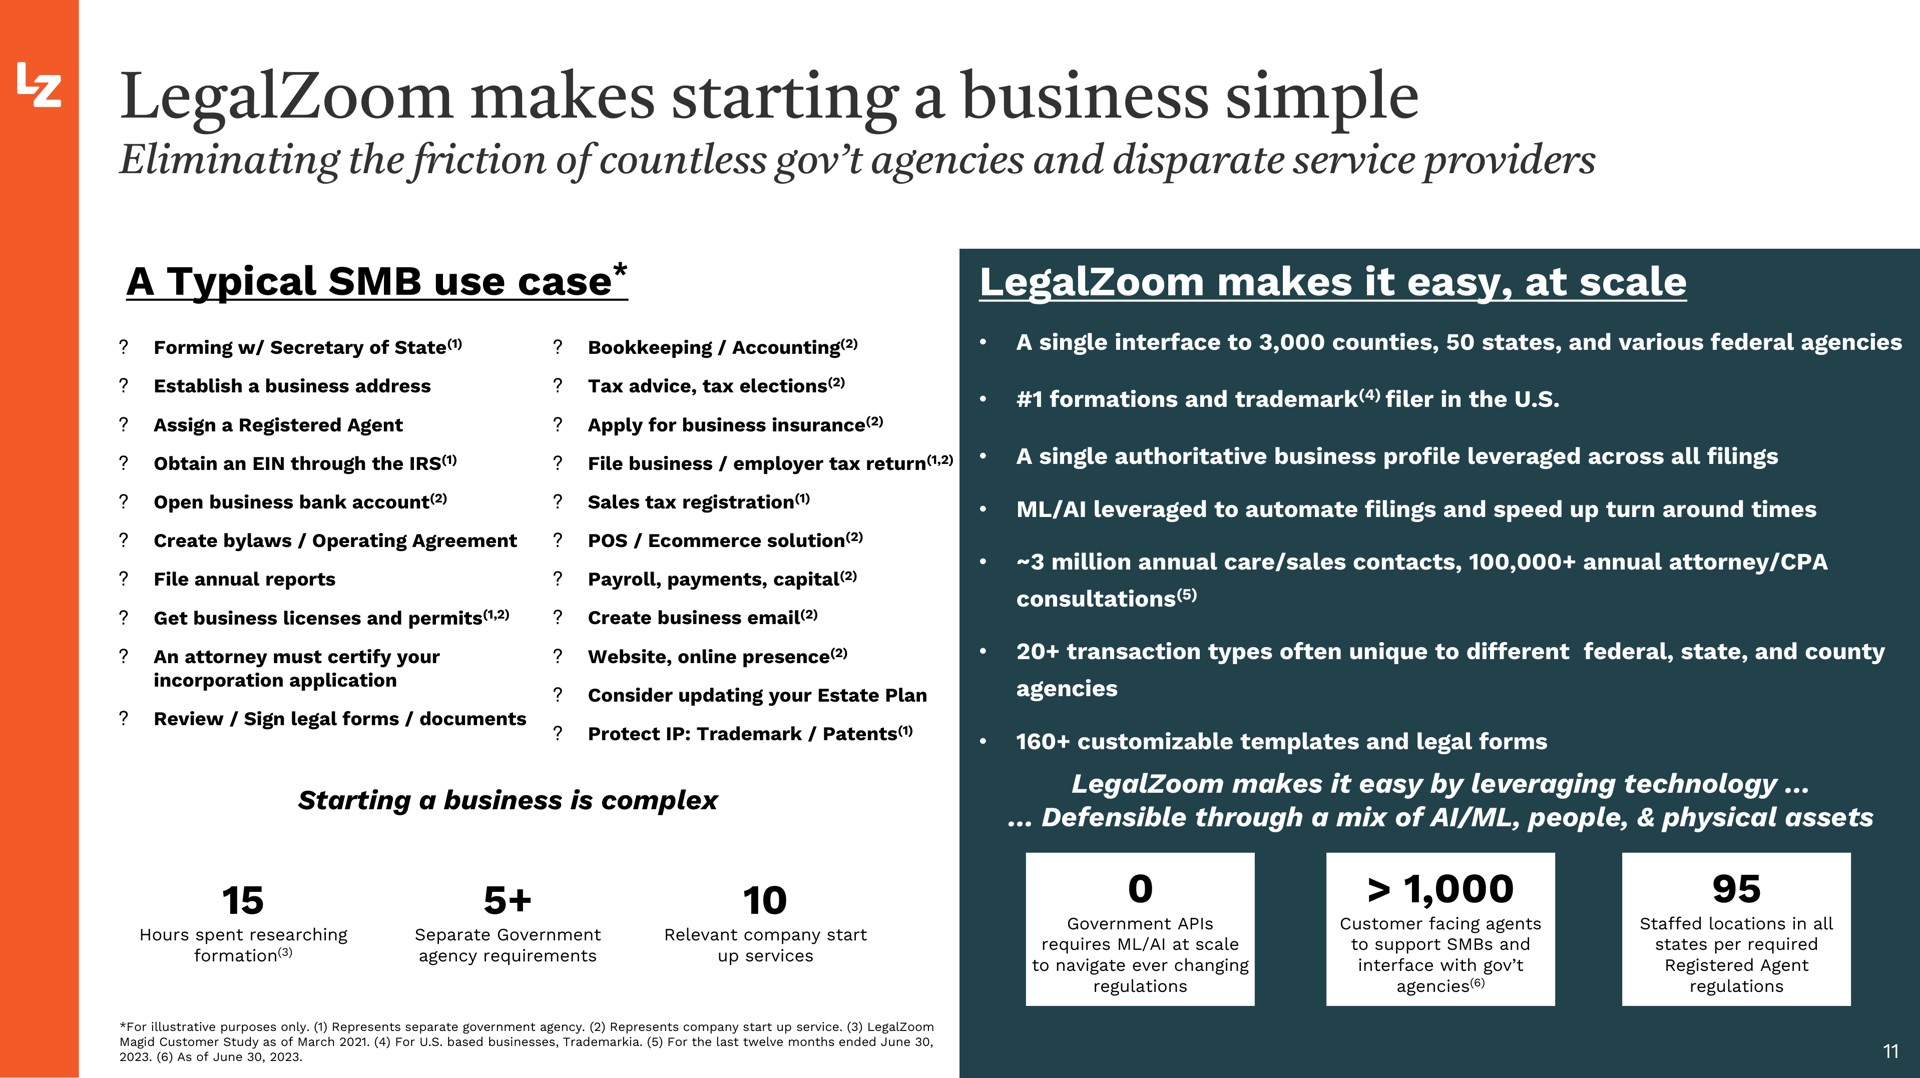 makes starting a business simple | LegalZoom.com